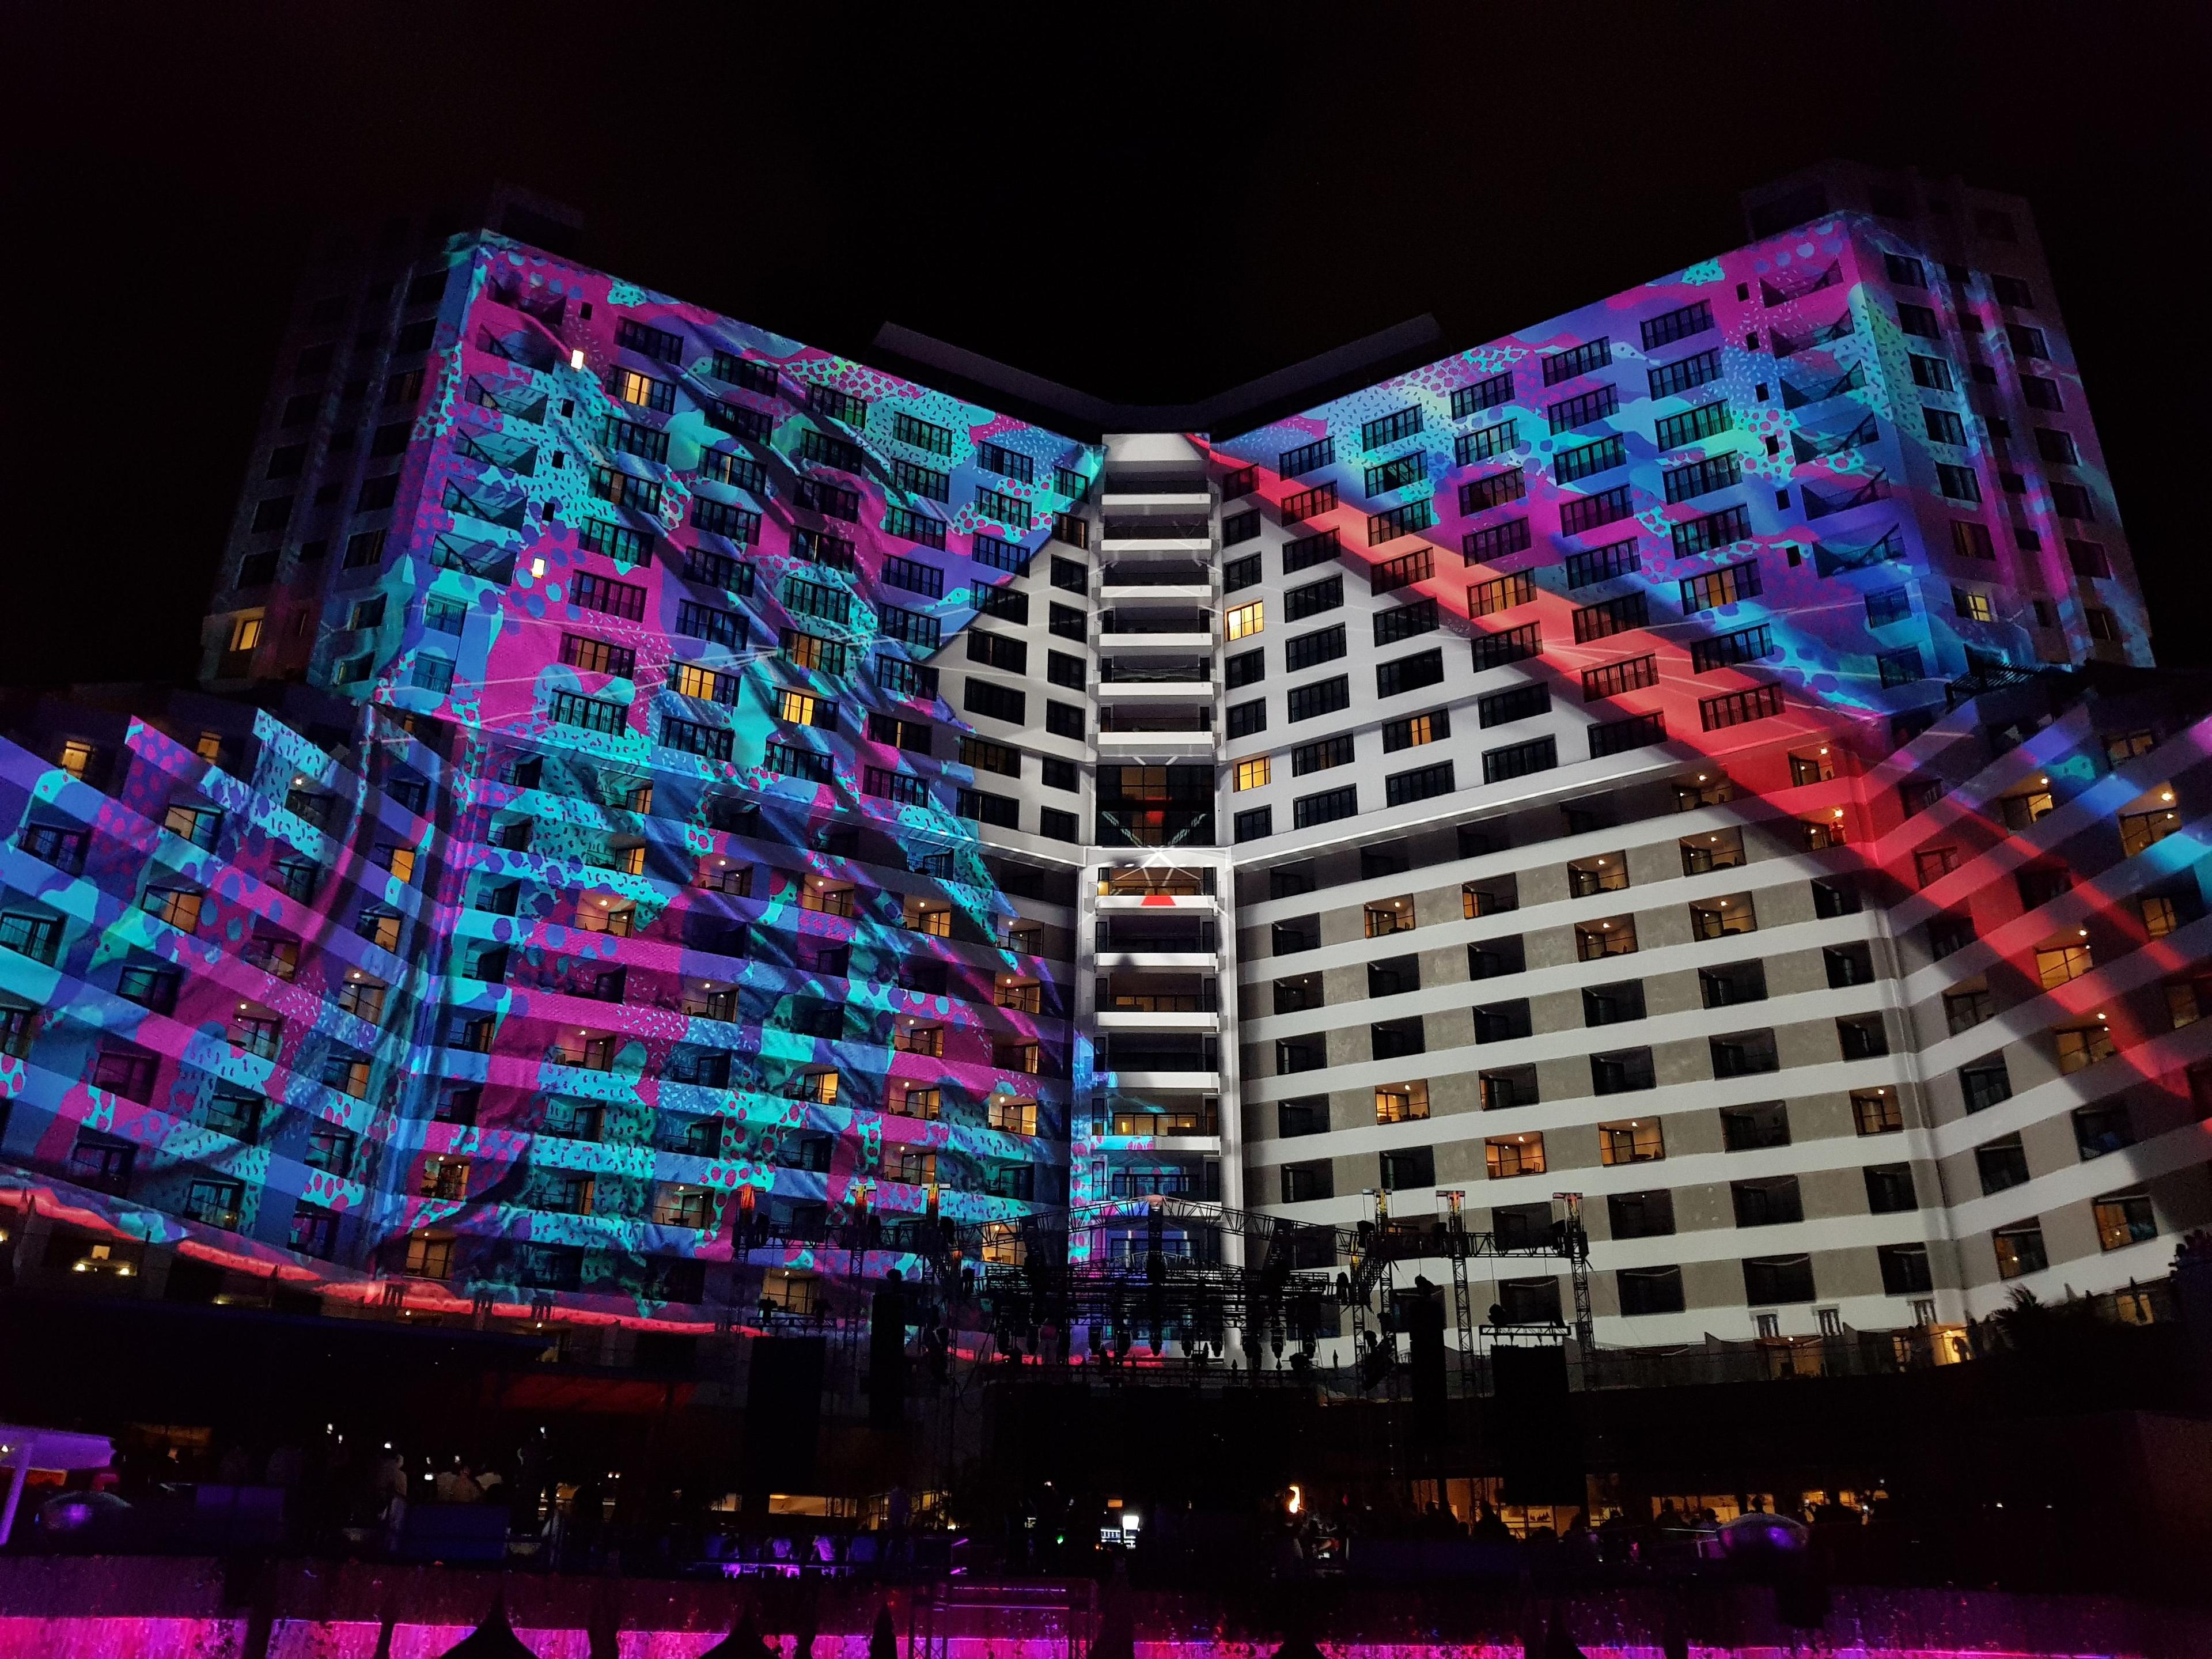 Giant permanent projection mapping show at the Melody Maker Hotel in Cancun run by a Screenberry media server